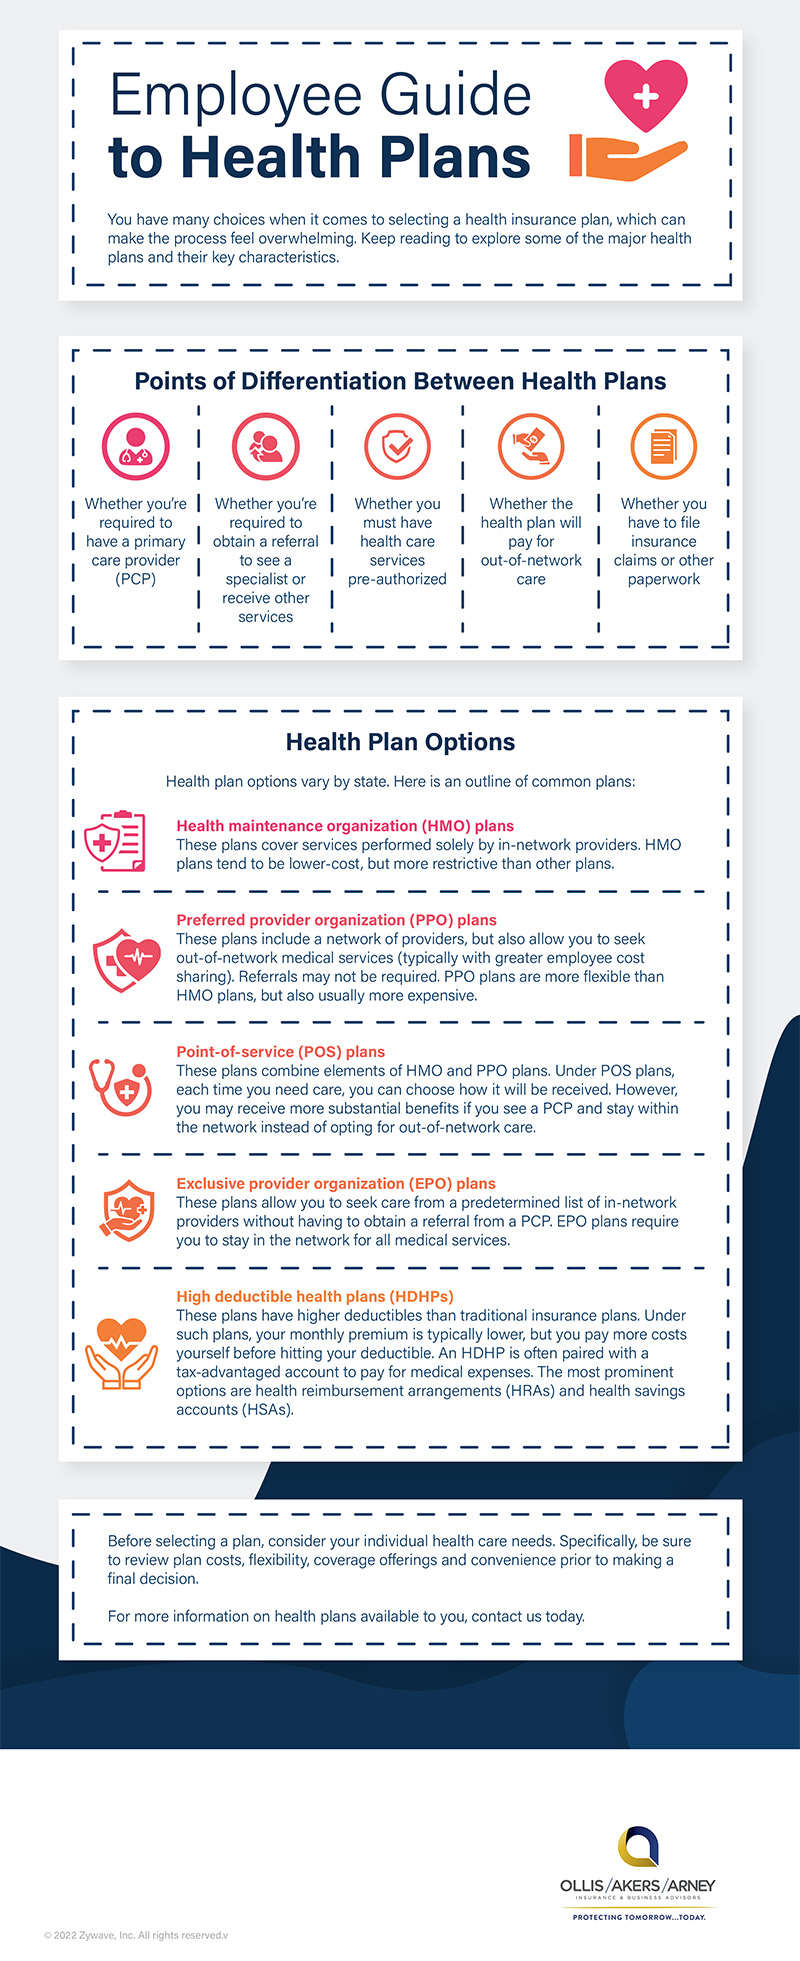 Employee Guide to Health Plans